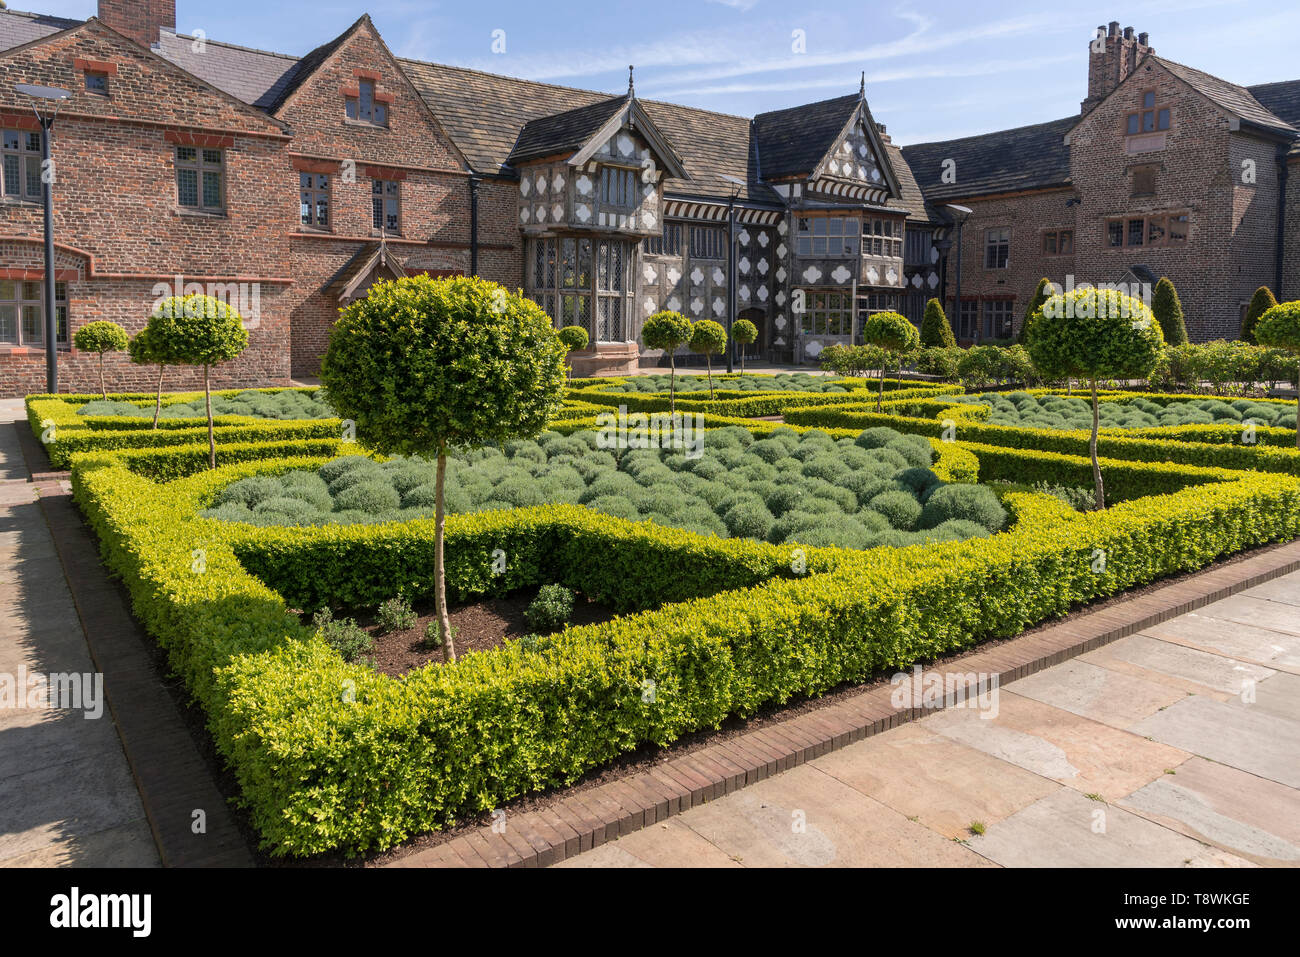 Ordsall Hall ma, ou maison Manchester. Banque D'Images